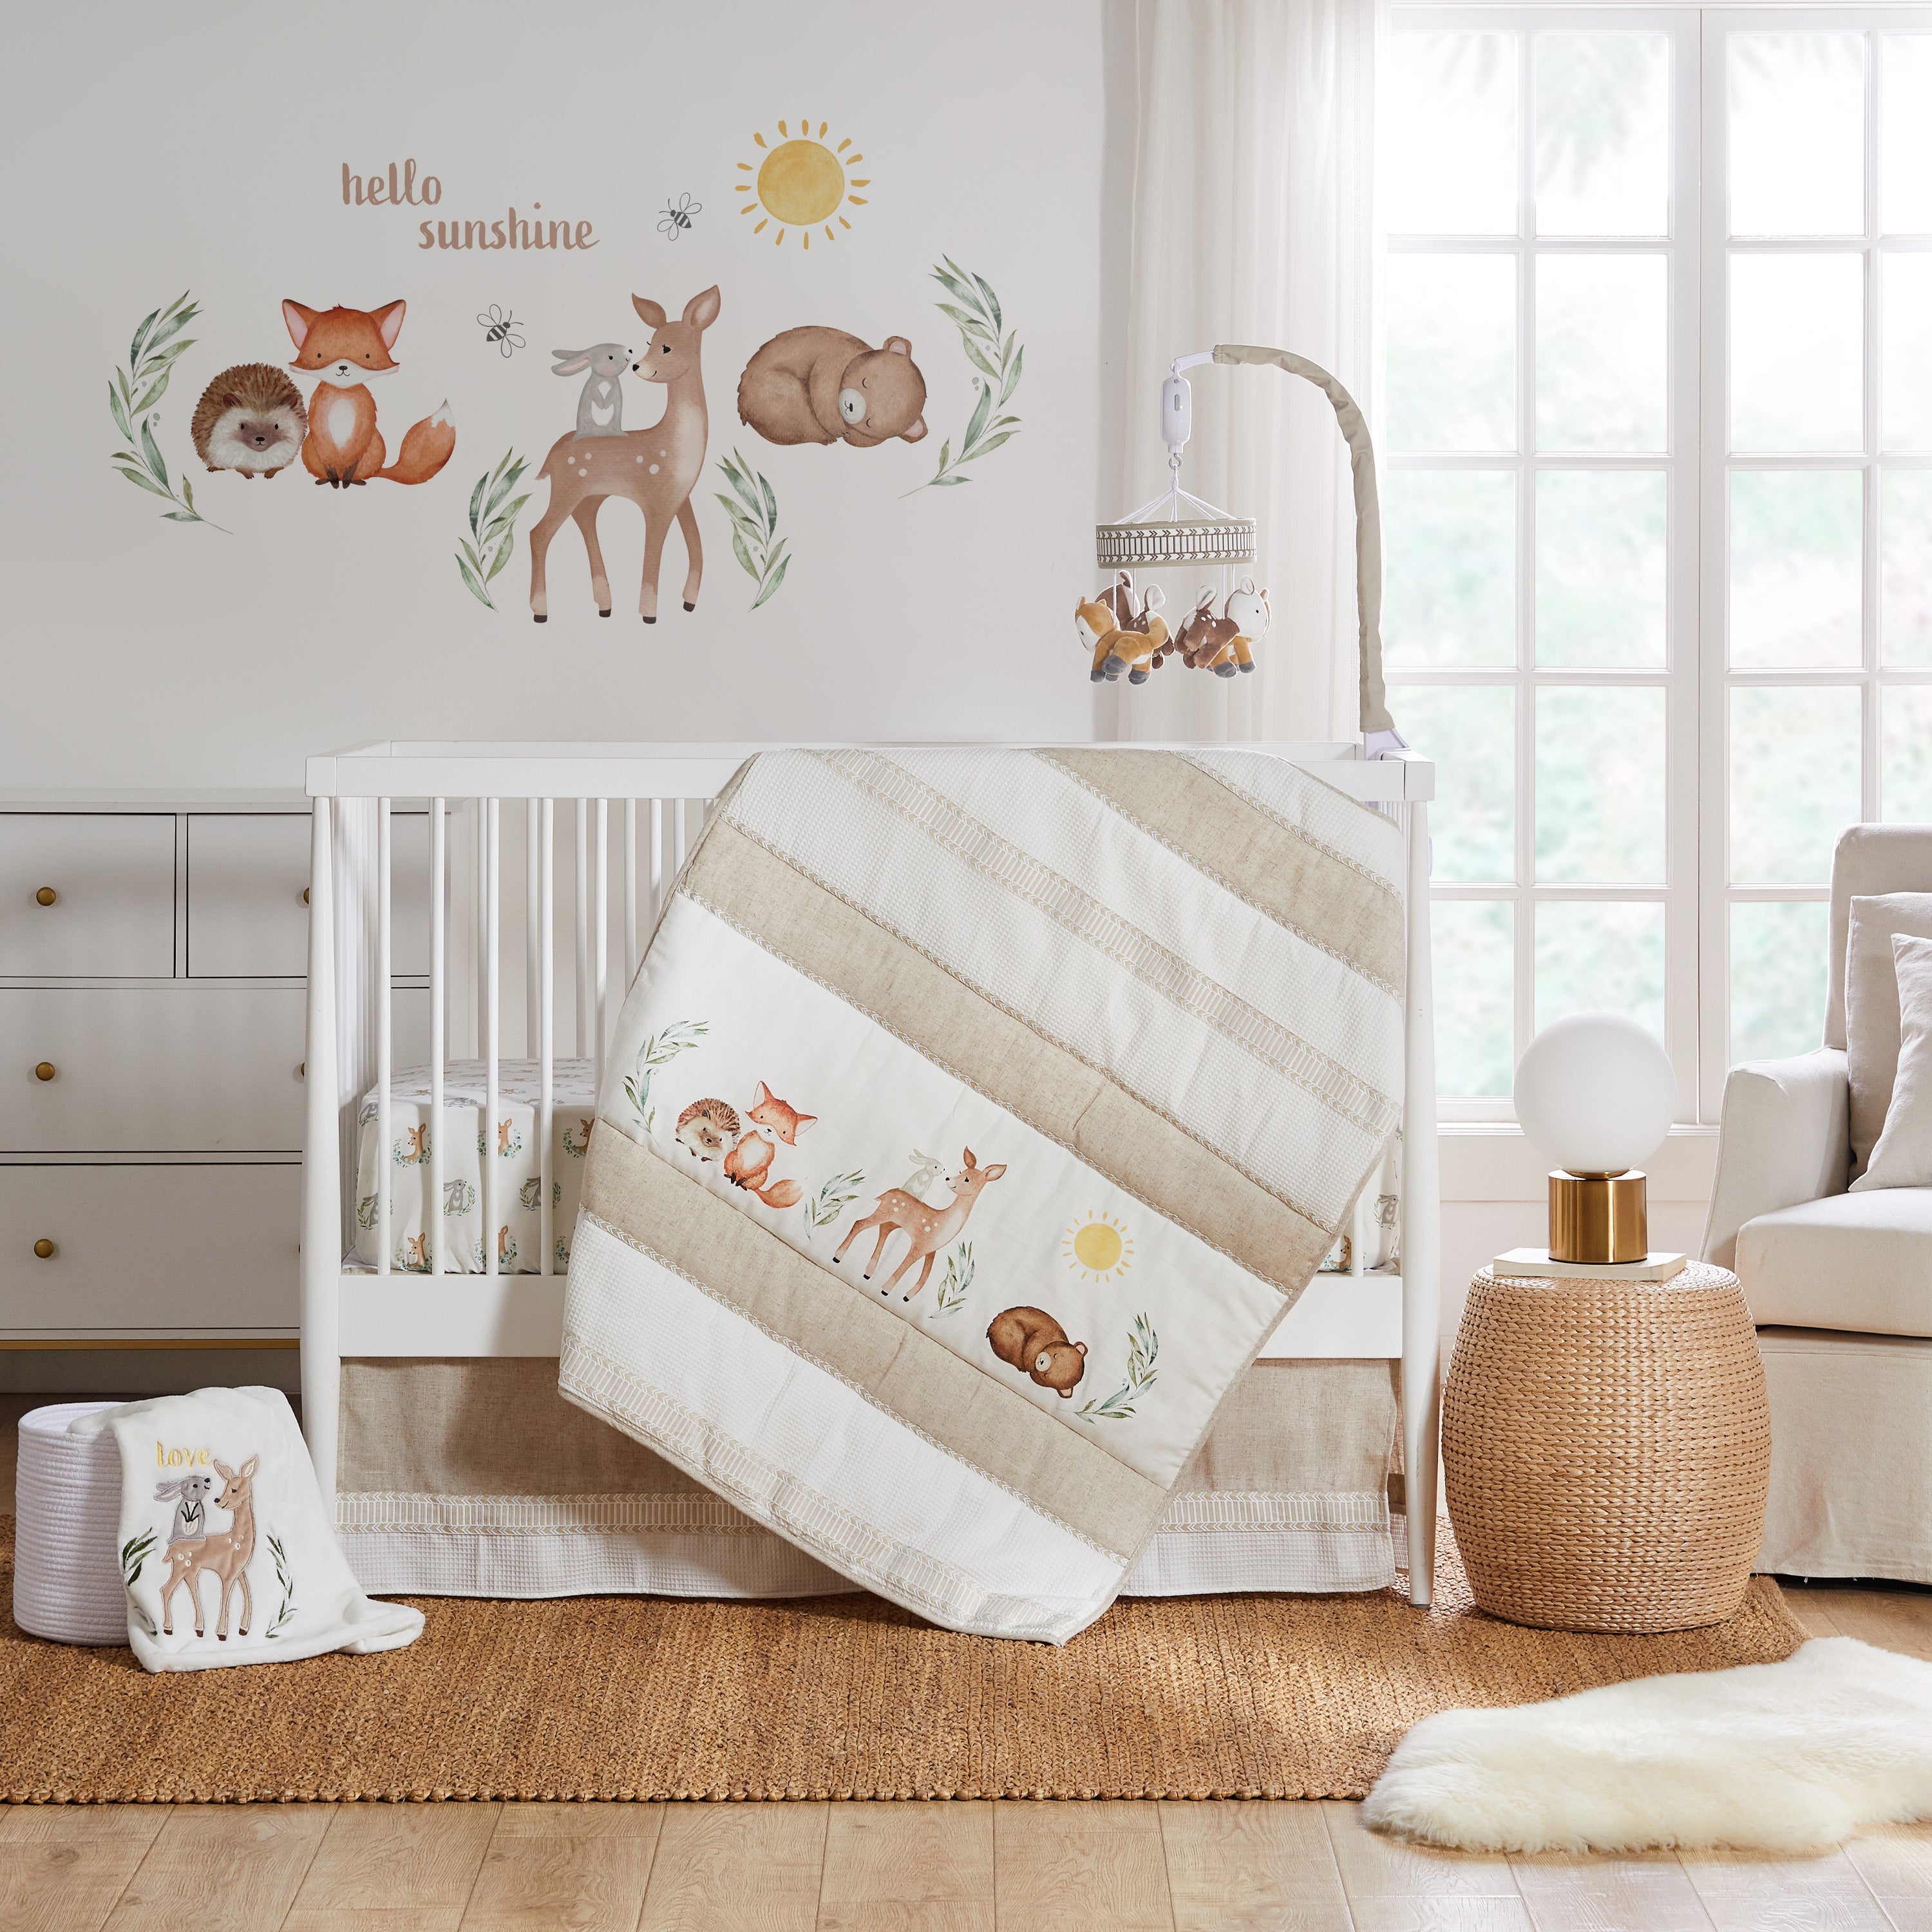 Nursery Ideas and Inspiration: Creating Your Baby's Wonderland